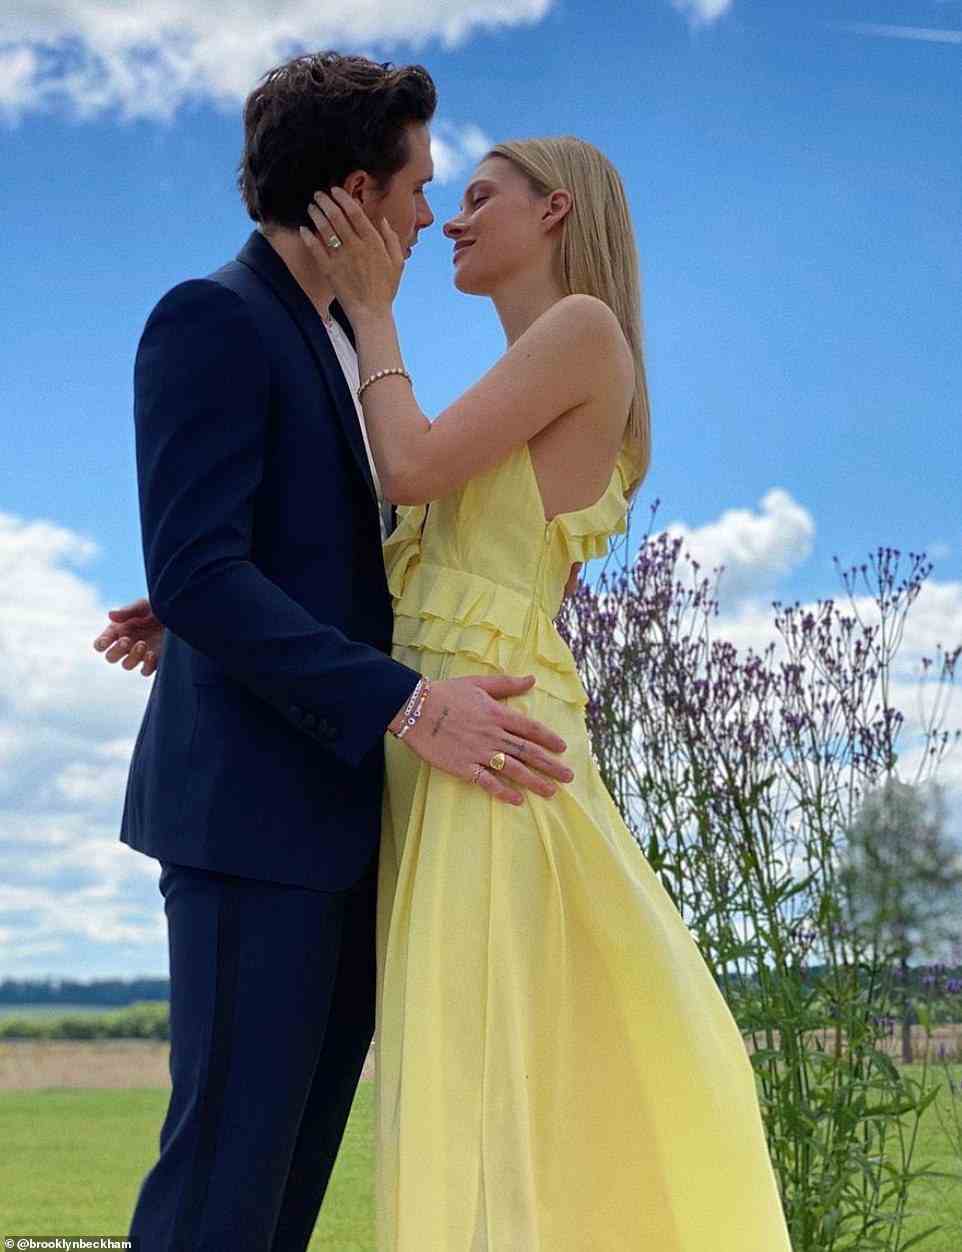 Congratulations: Brooklyn Beckham and Nicola Peltz (pictured after getting engaged) have tied the knot in a stunning early-evening ceremony beside the ocean surrounded by celebrities including tennis legend Serena Williams